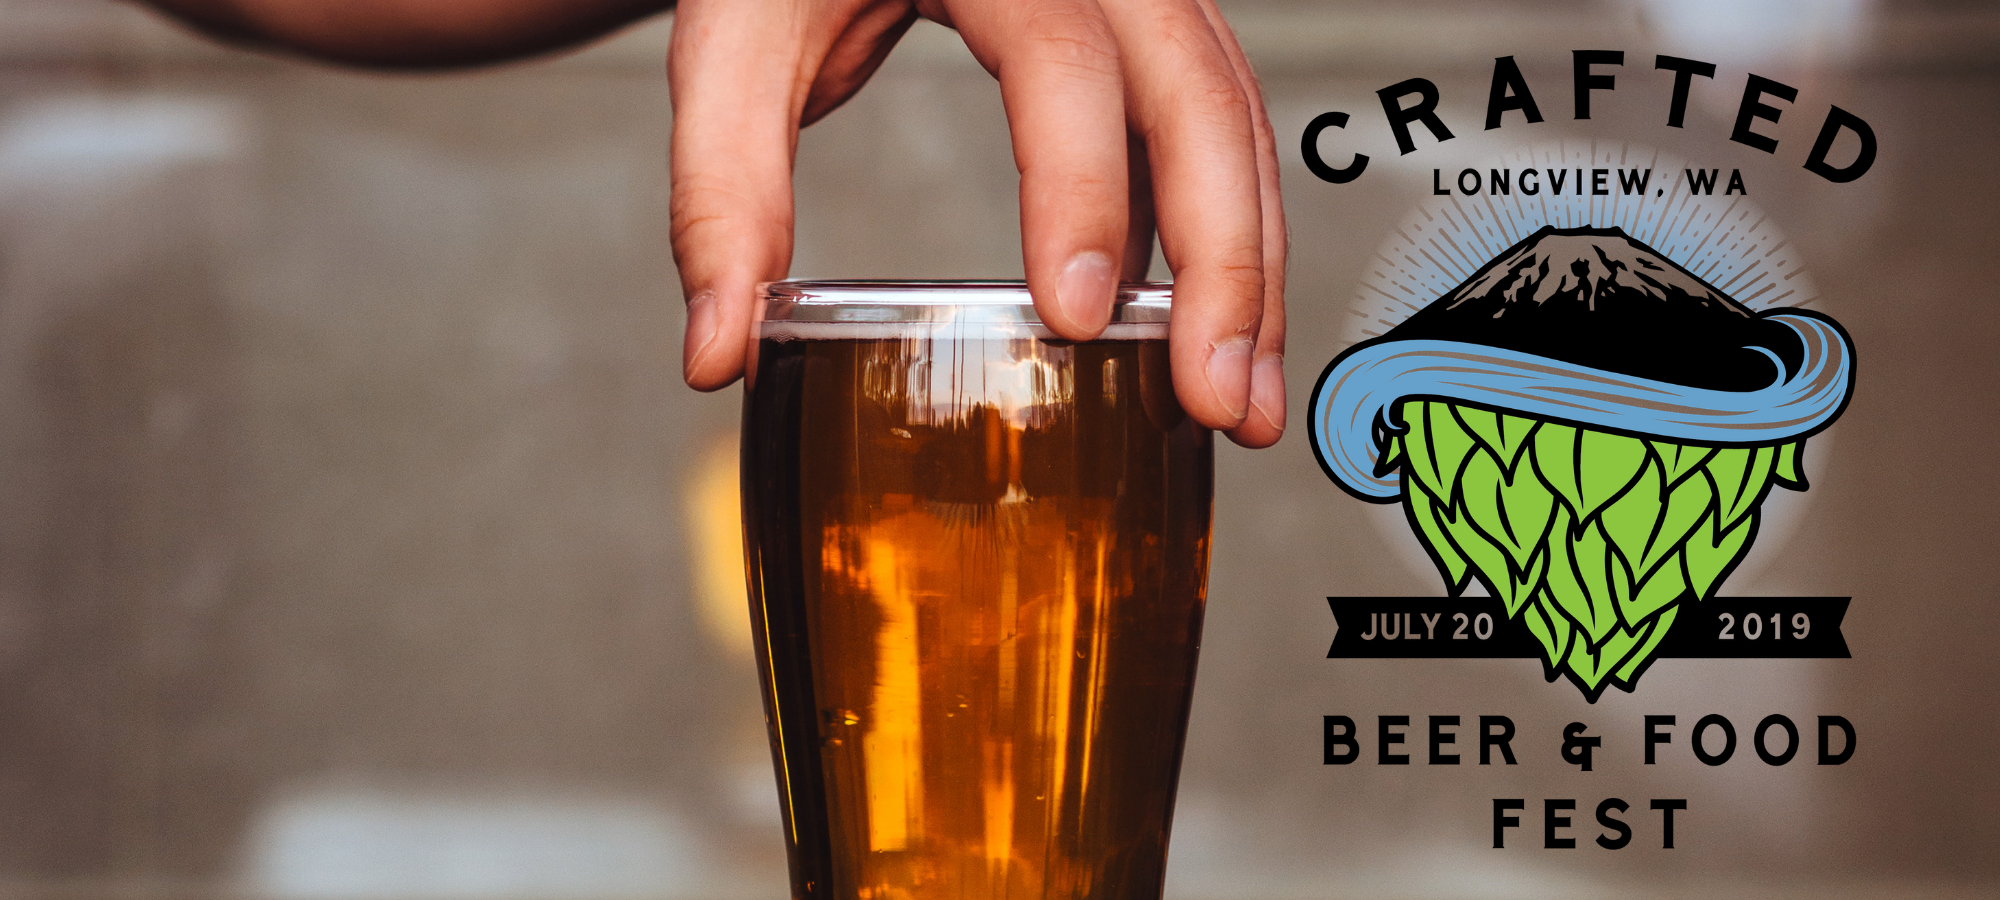 CRAFTED Beer and Food Festival banner image